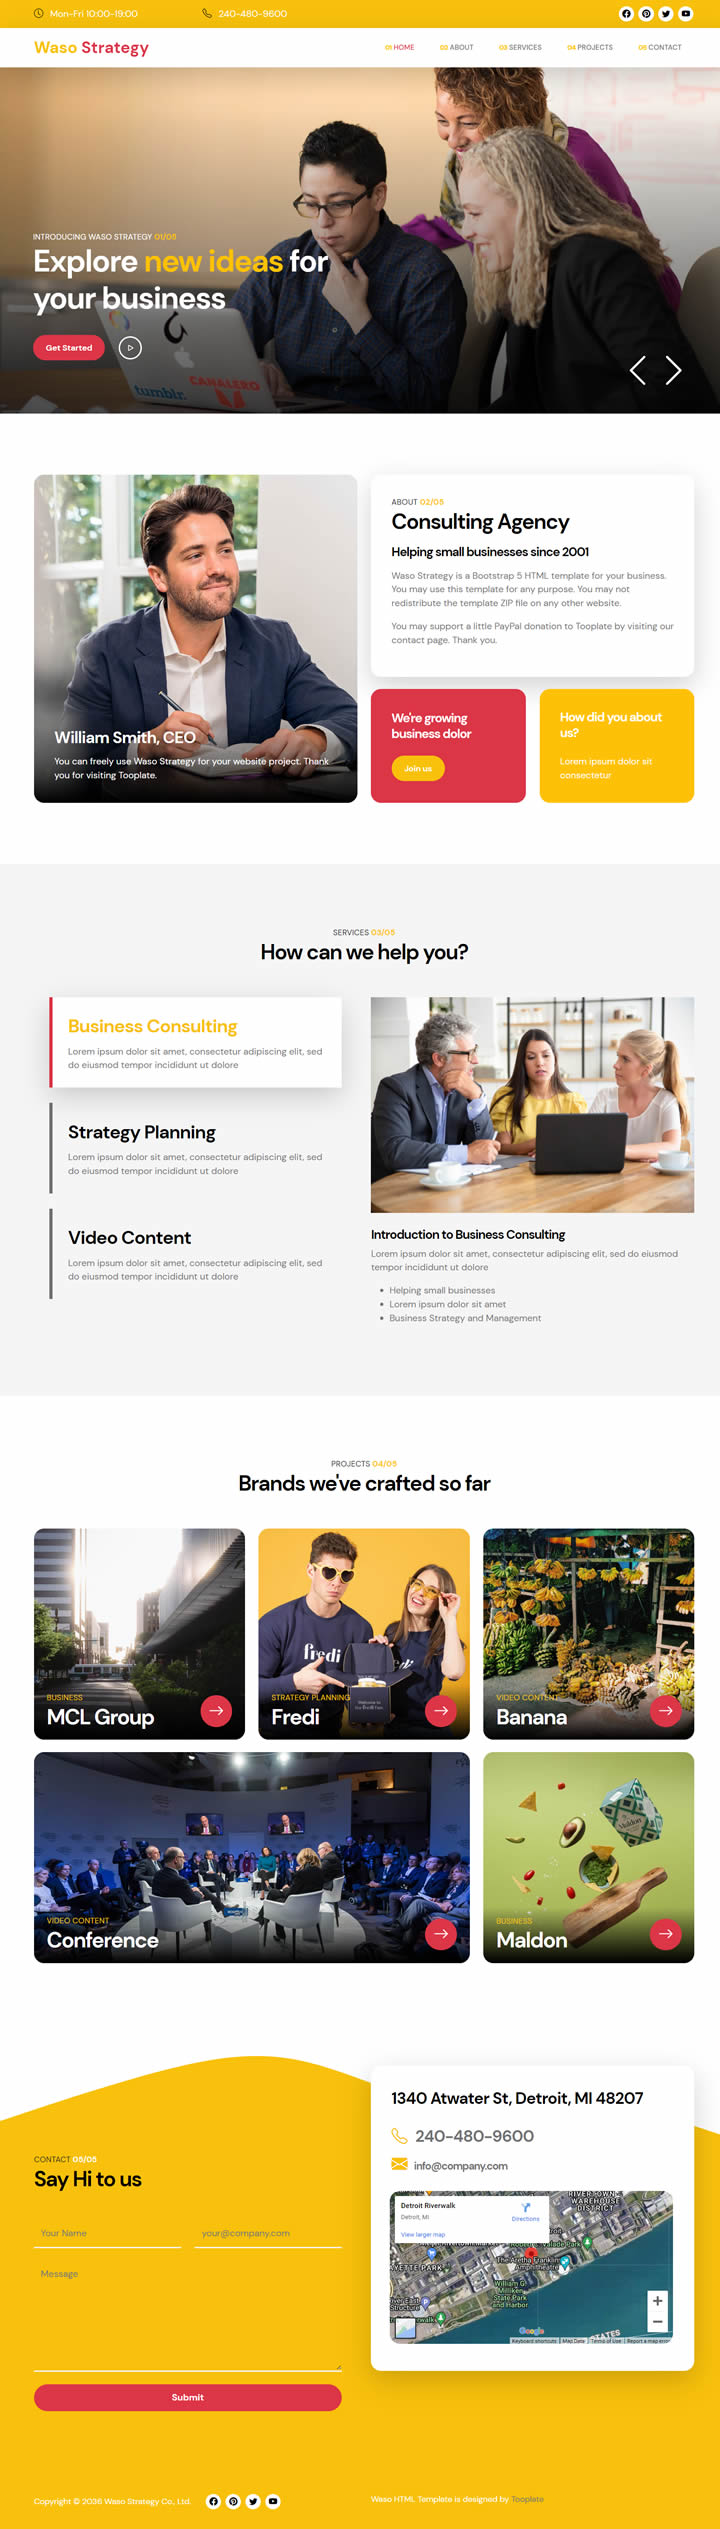 Waso Strategy HTML Template